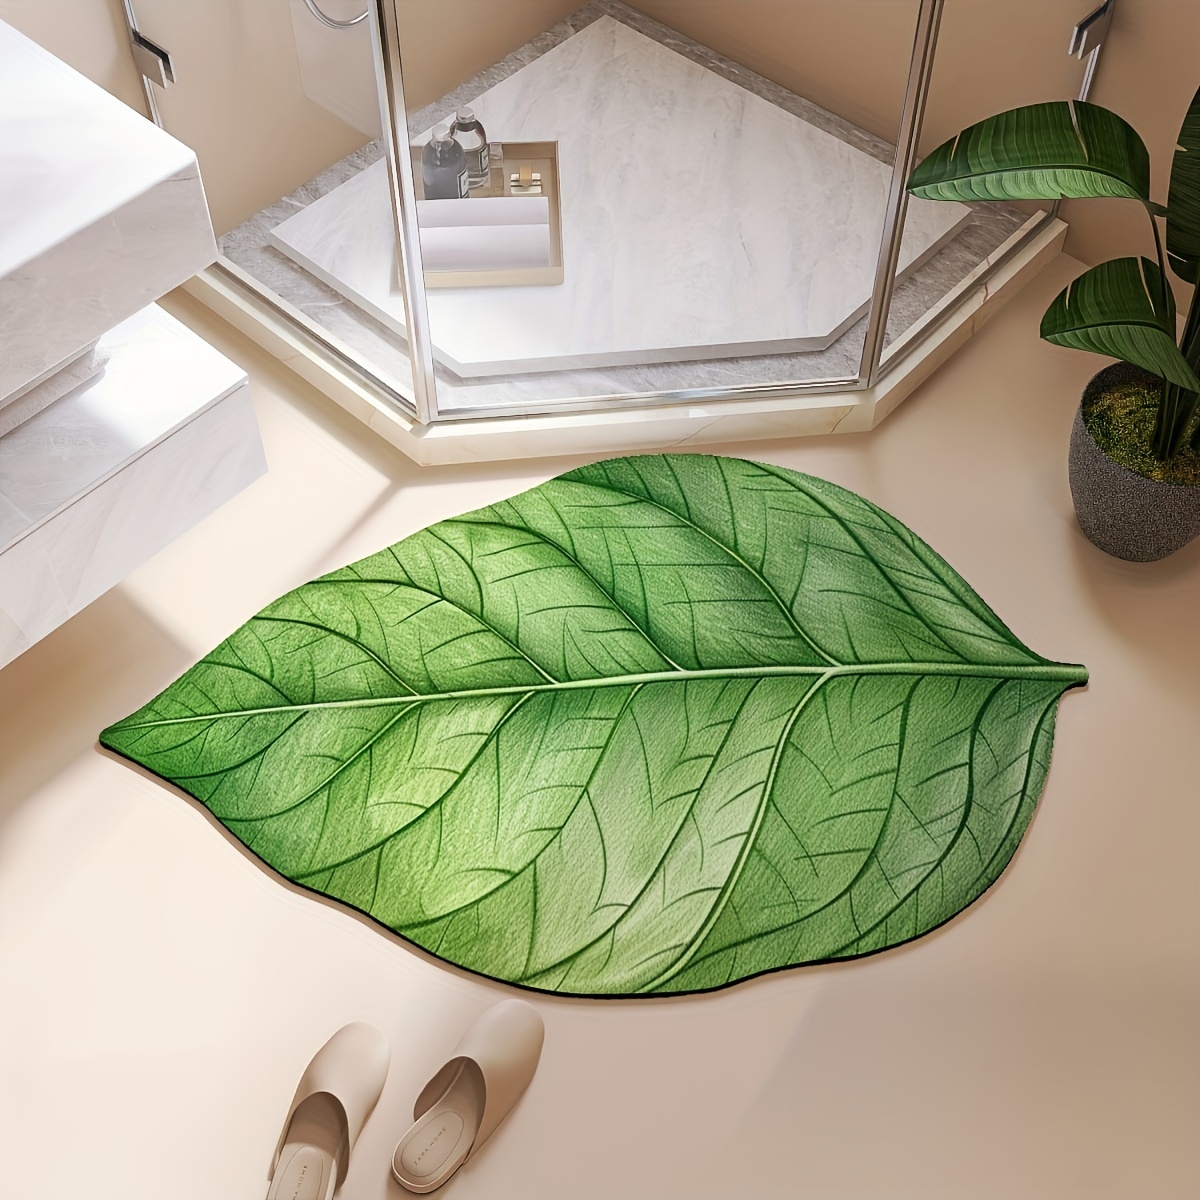 

Versatile Leaf-shaped Diatomaceous Earth Mat With Non-slip Rubber Backing - Water Absorbent, Durable For Bathroom, Kitchen, Entryway & More - Available In 40x70cm, 50x80cm, 60x90cm Sizes